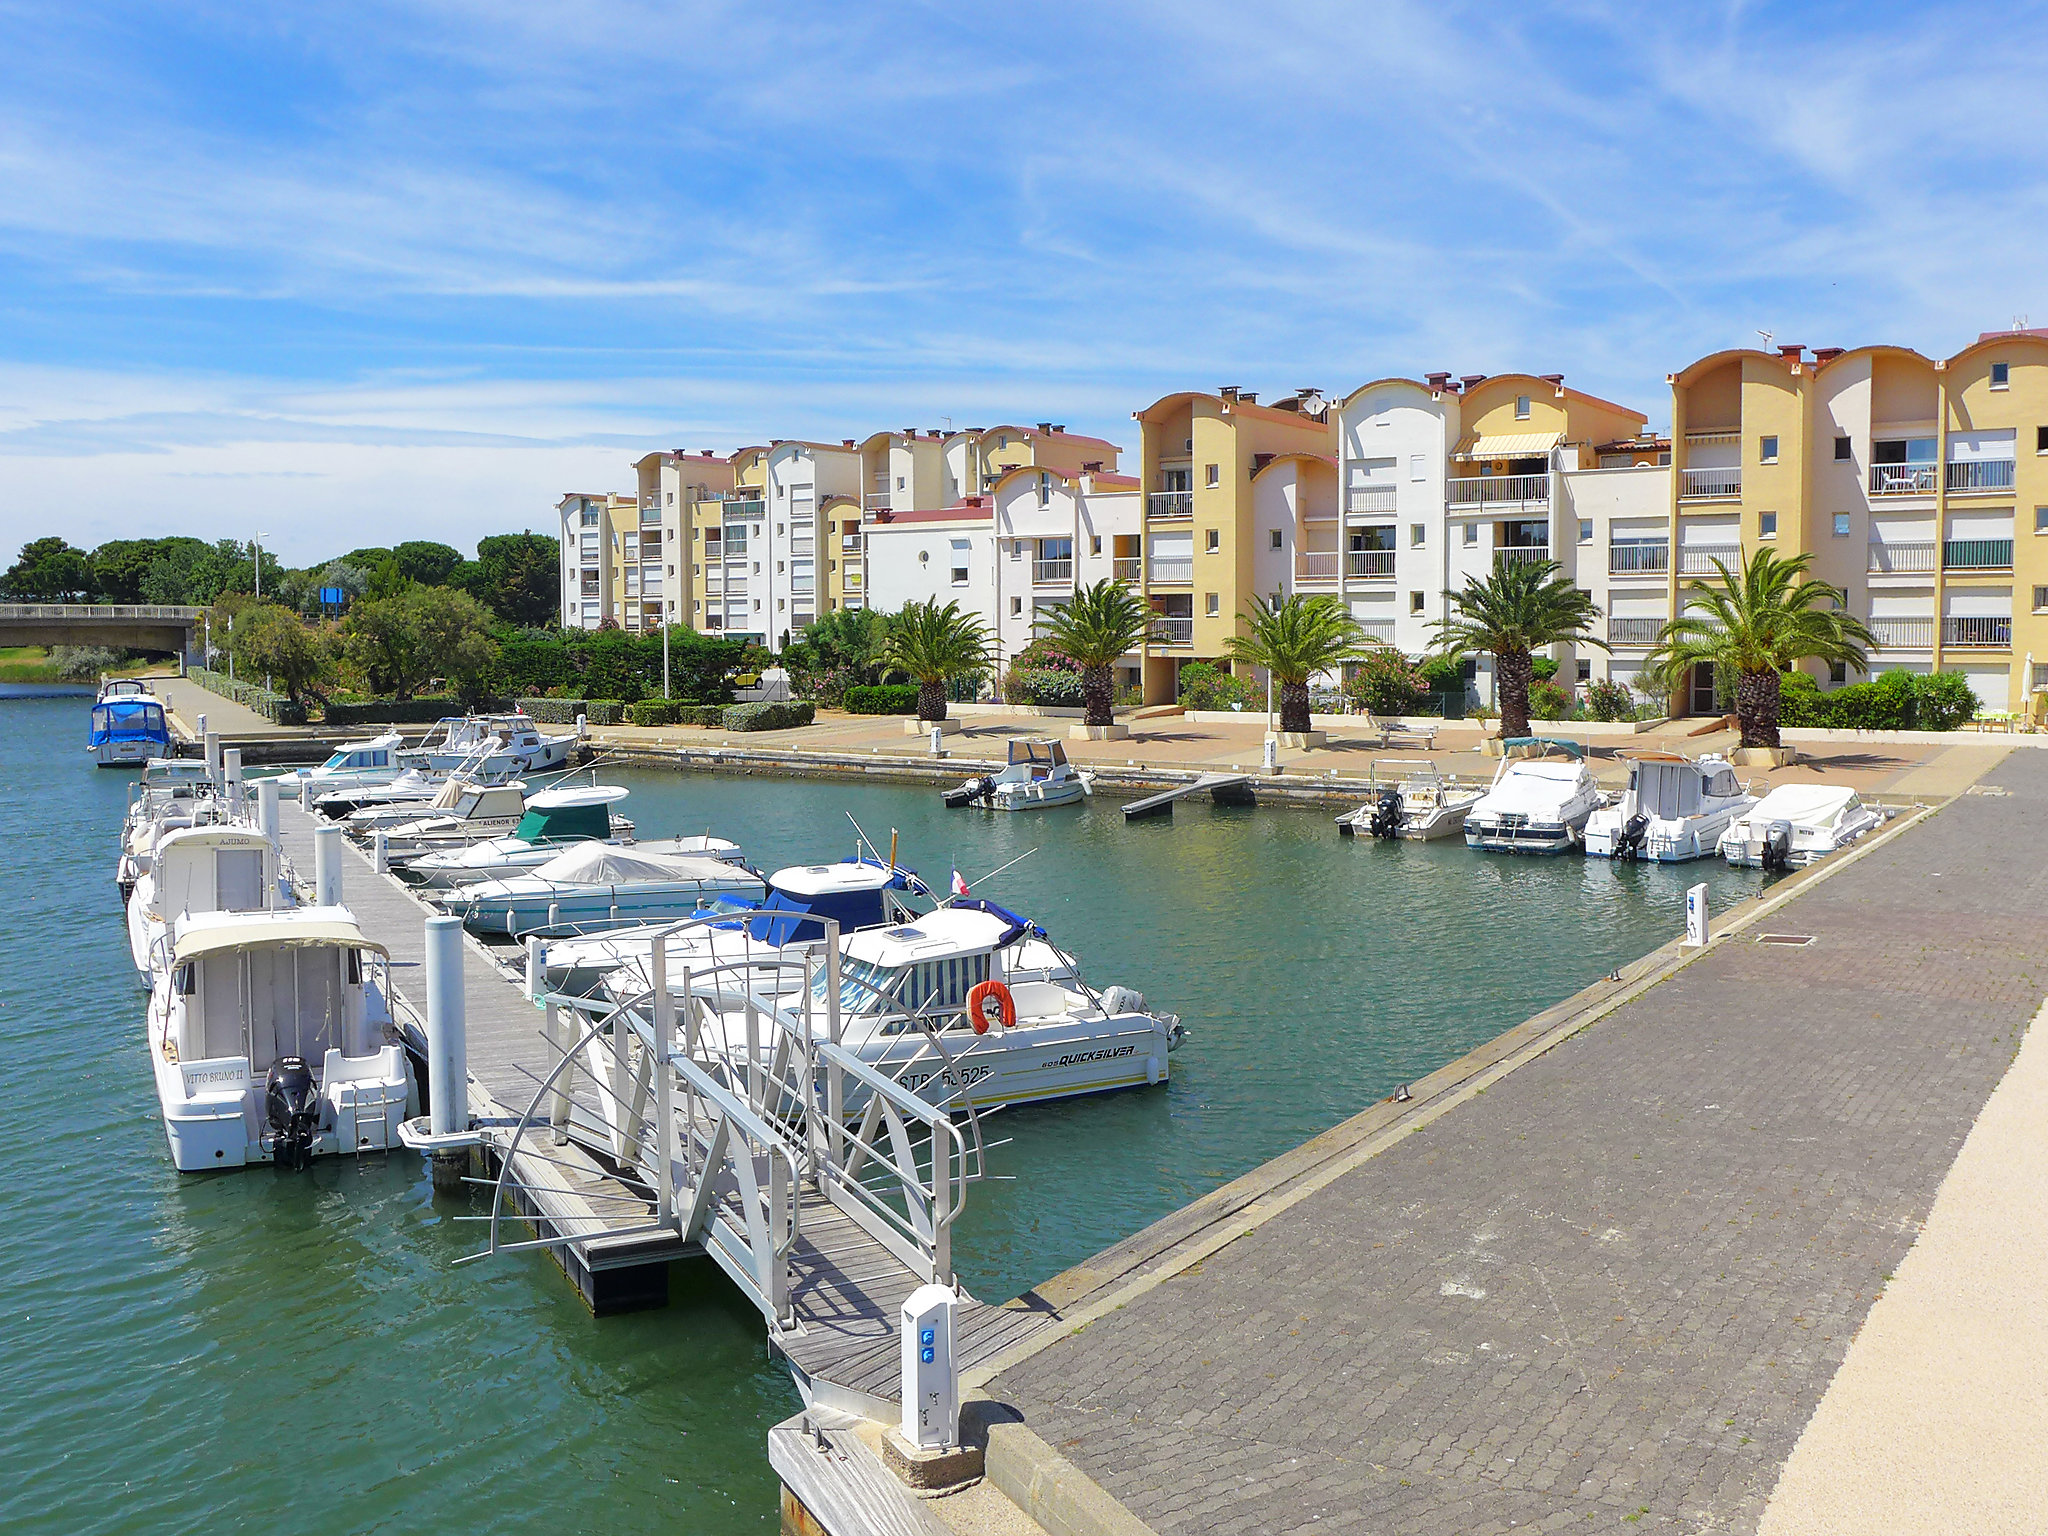 Les Marines Ii  With 1 Bedrooms And 1.5 Bathrooms - Narbonne